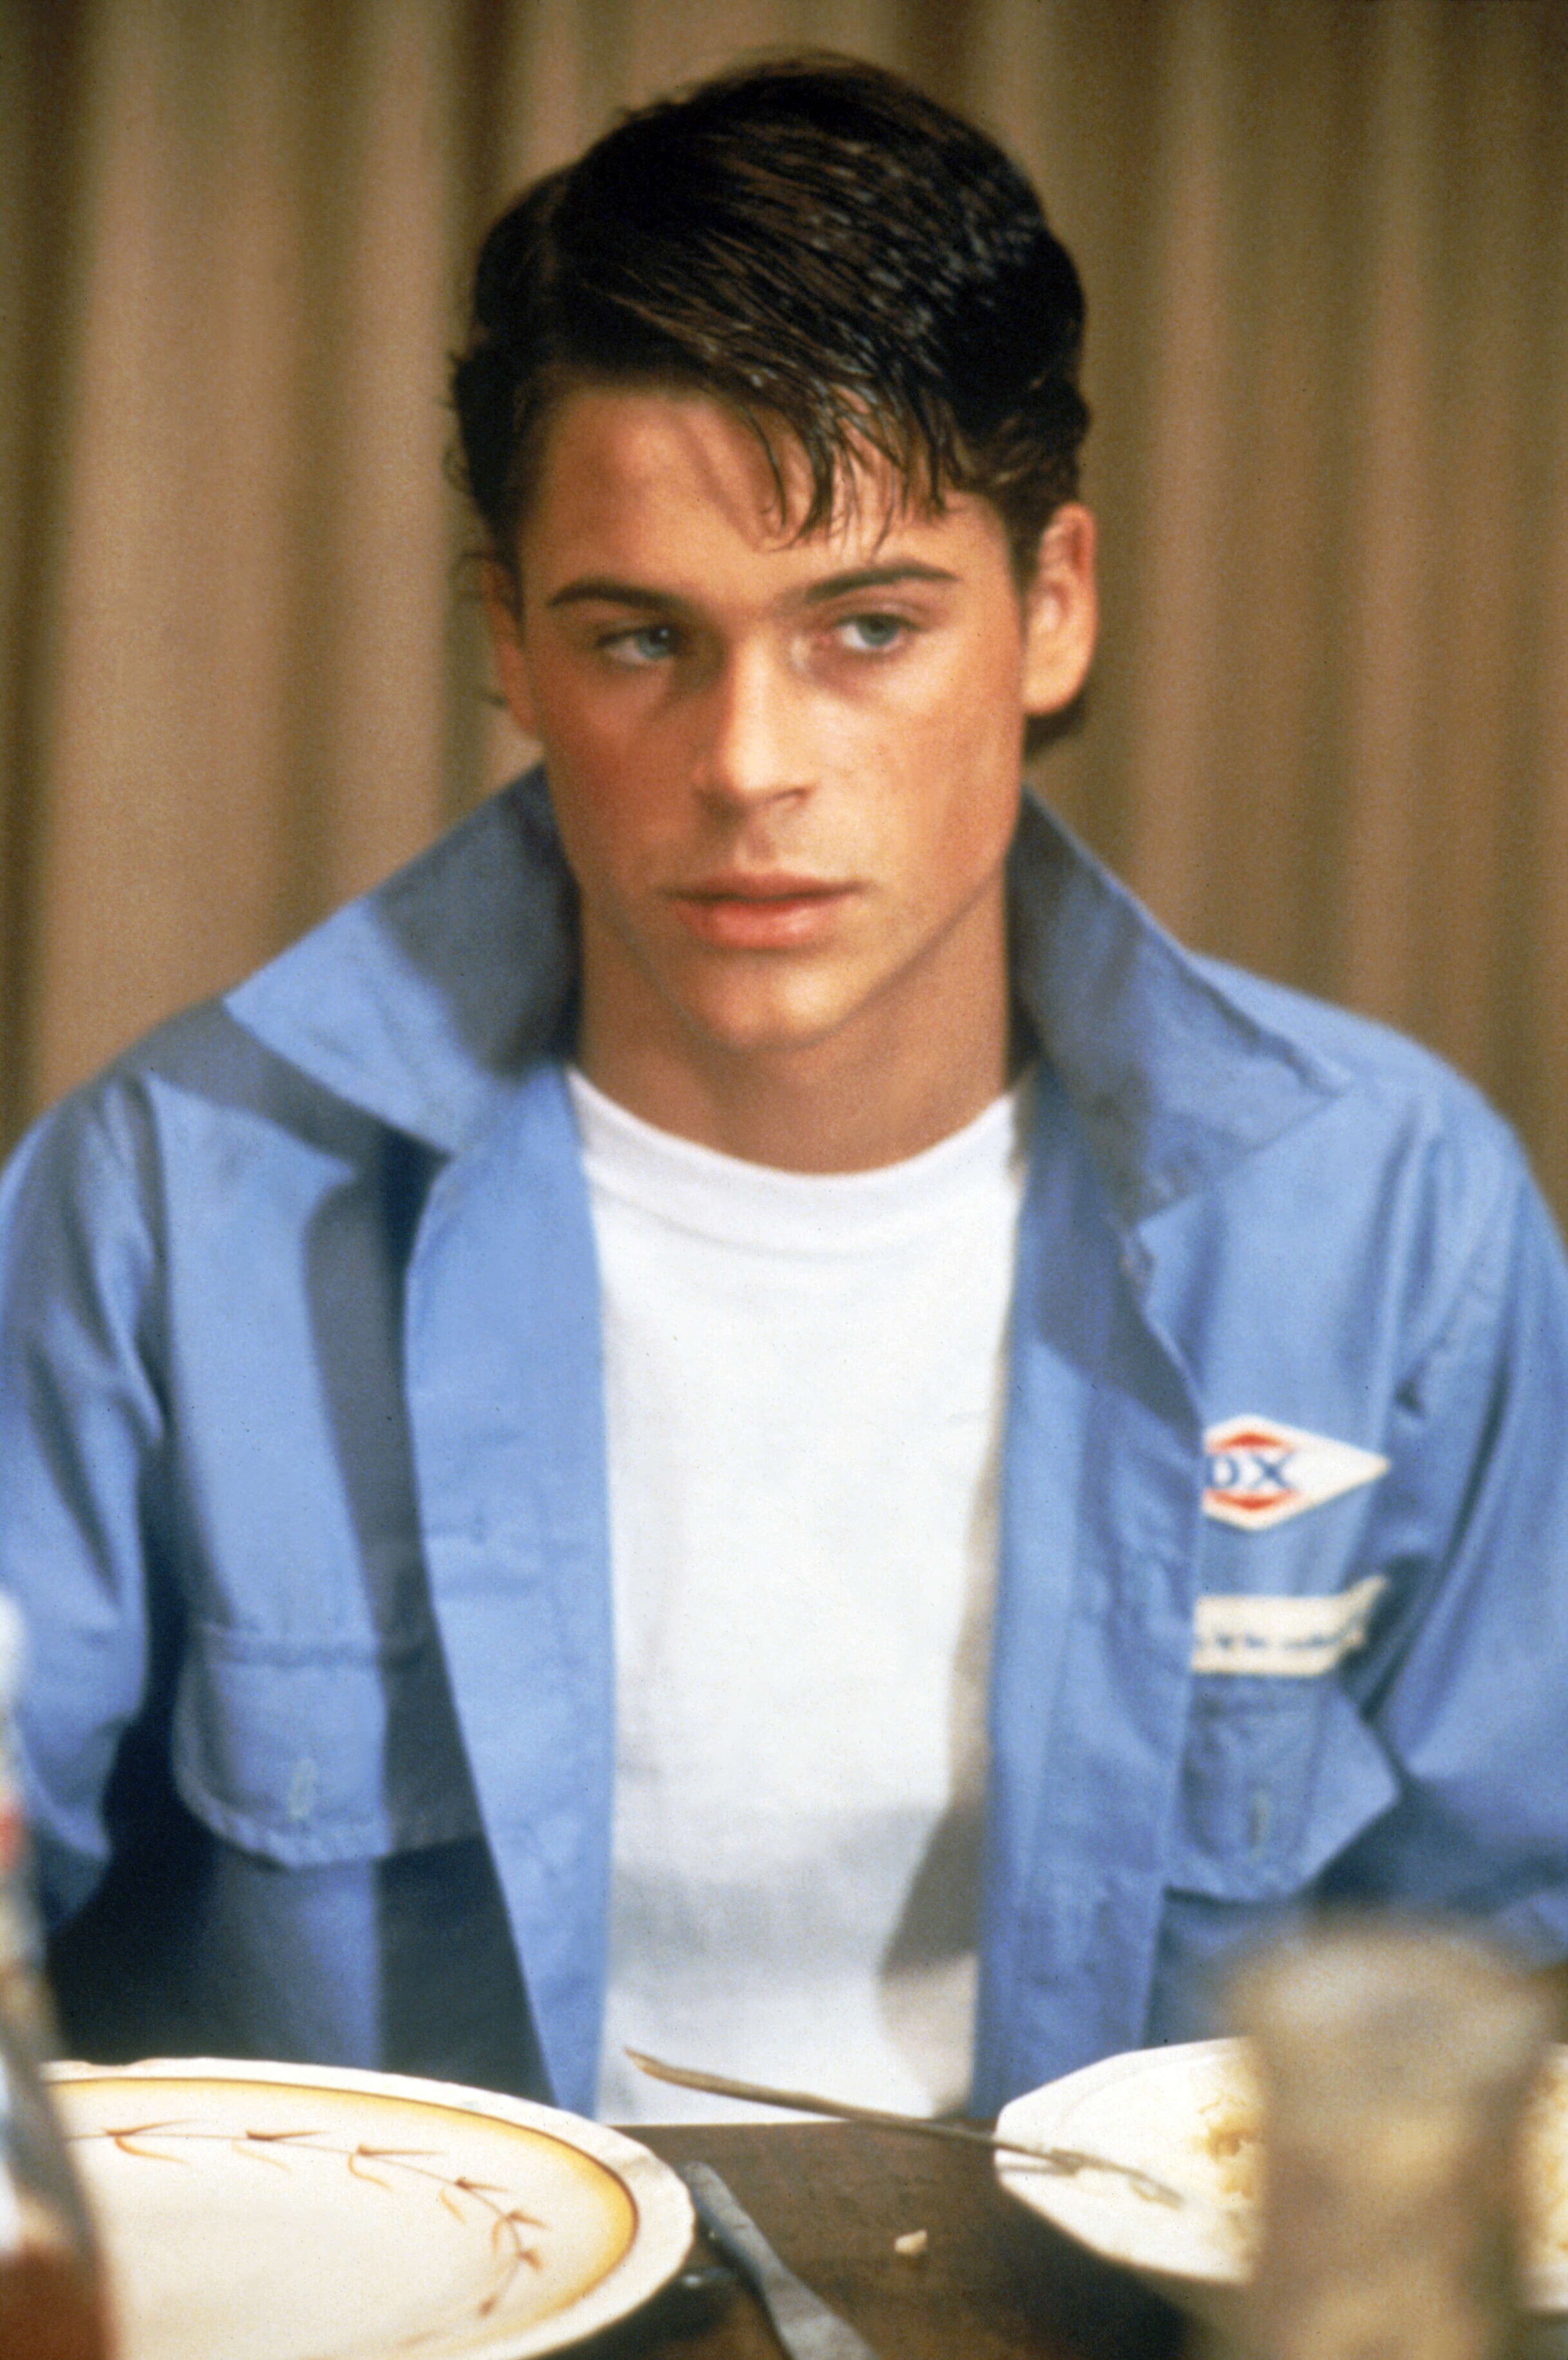 Rob Lowe on the set of "The Outsiders" in 1983 | Source: Getty Images